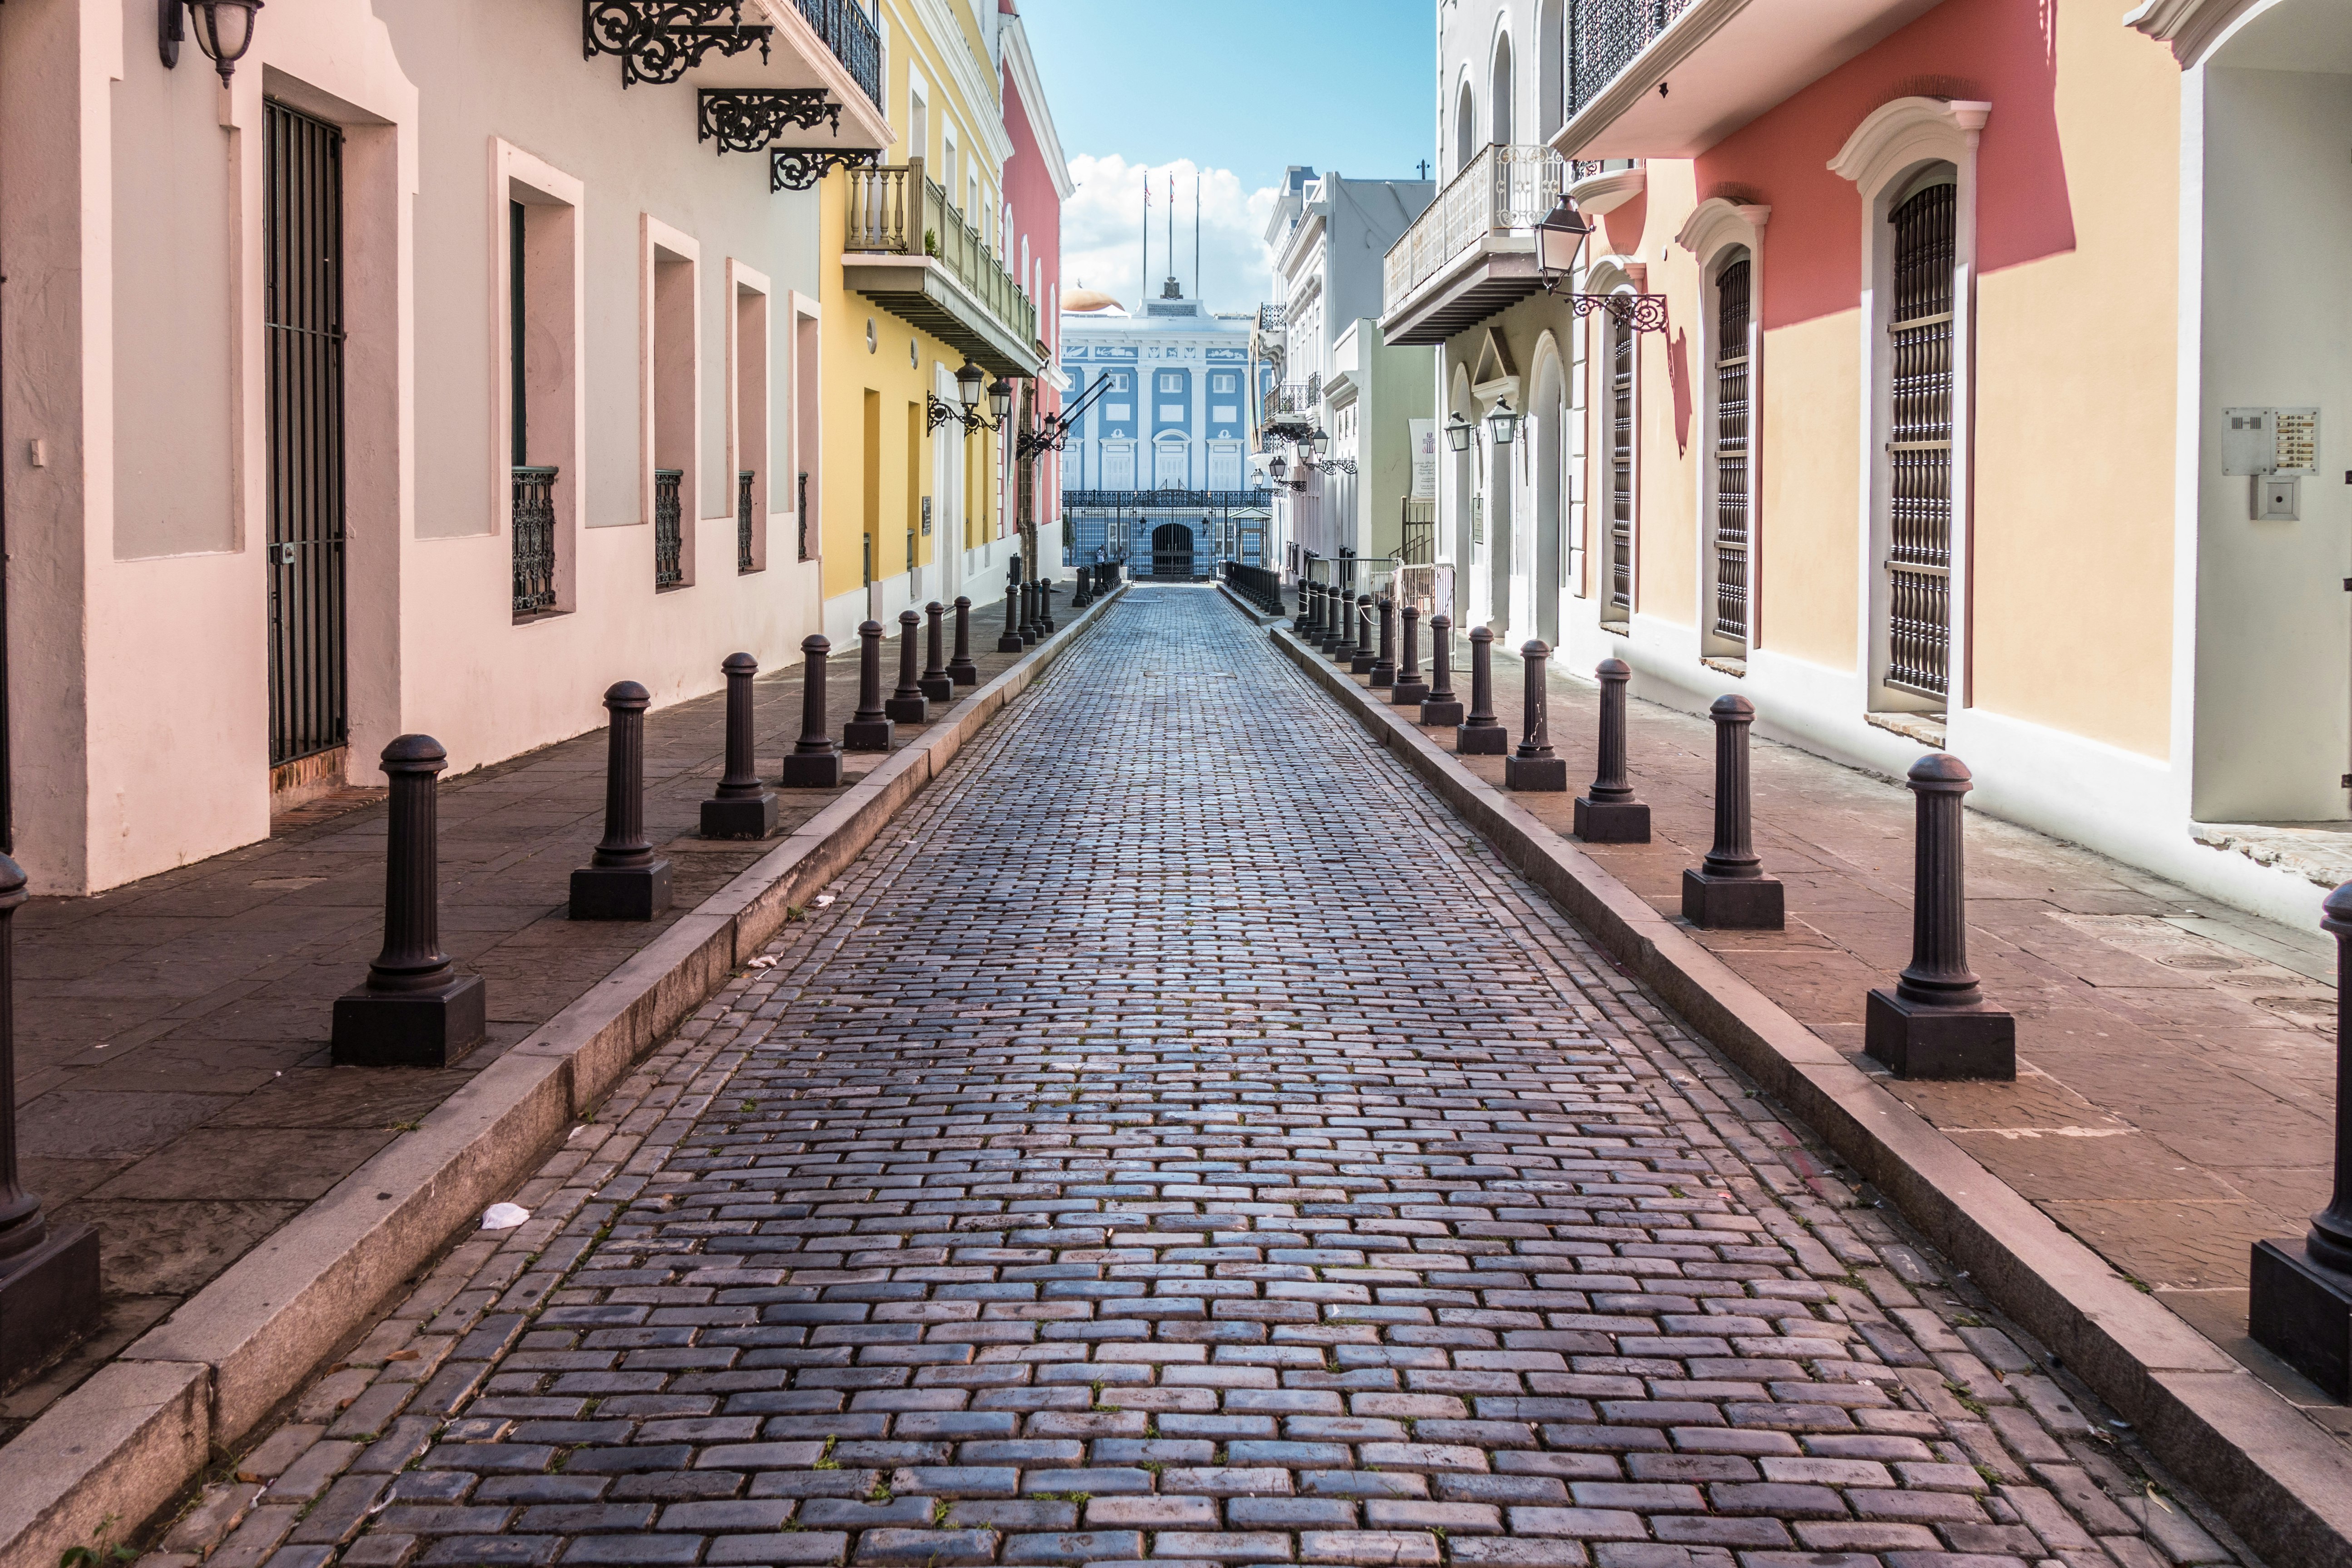 A cobbled street flanked by colorful buildings in Old San Juan town, Puerto Rico